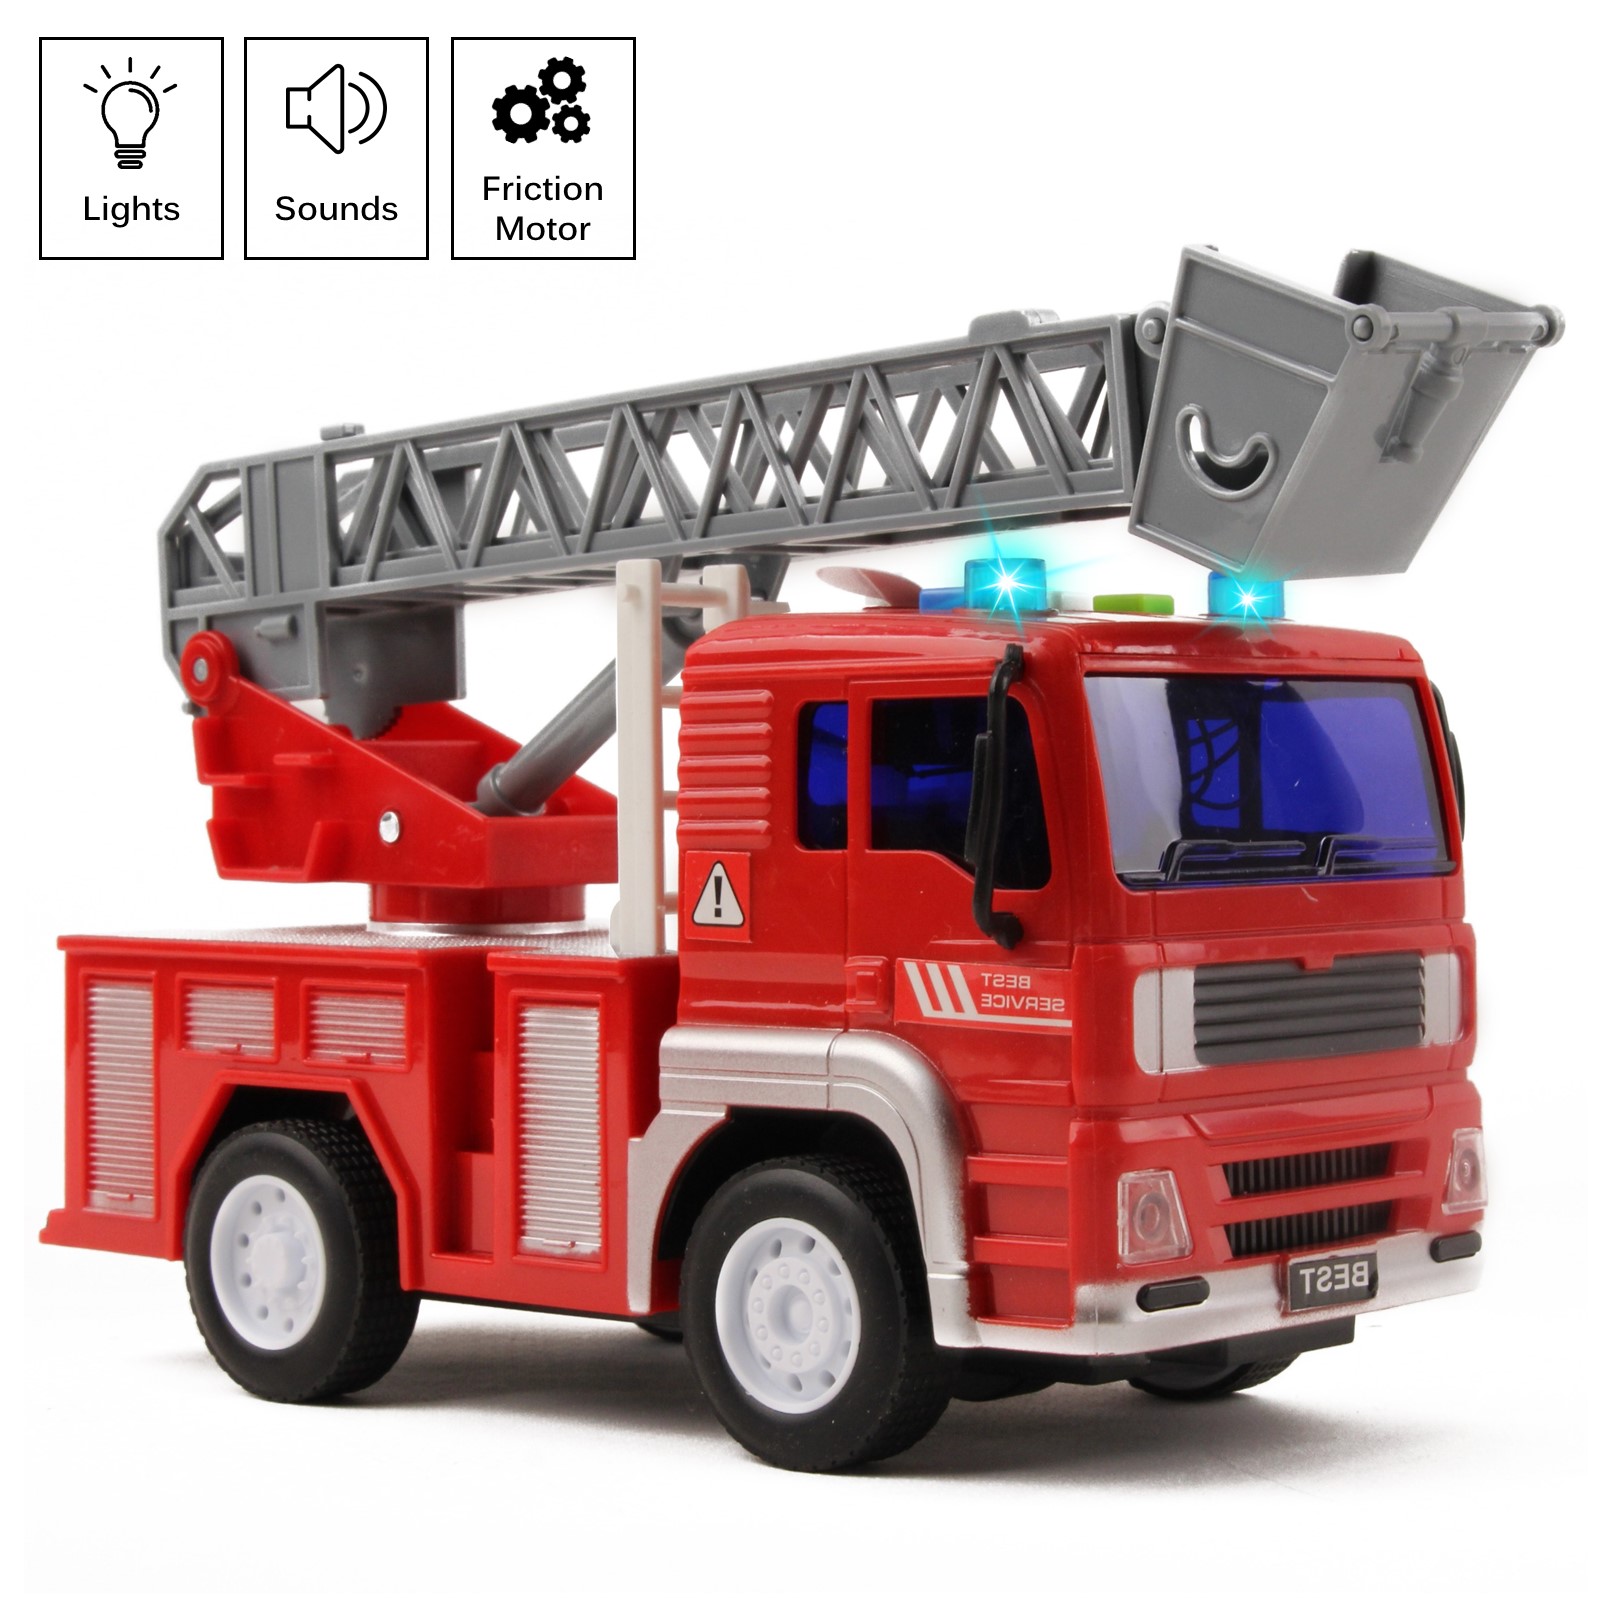 Fire Truck Rescue With Lights And Sounds 125 Extending Ladder 360 Rotation Friction Powered Toy Car Kids Push And Go Firetruck Engine Vehicle Pretend Play Great Gift For Children Boys Girls TE-93